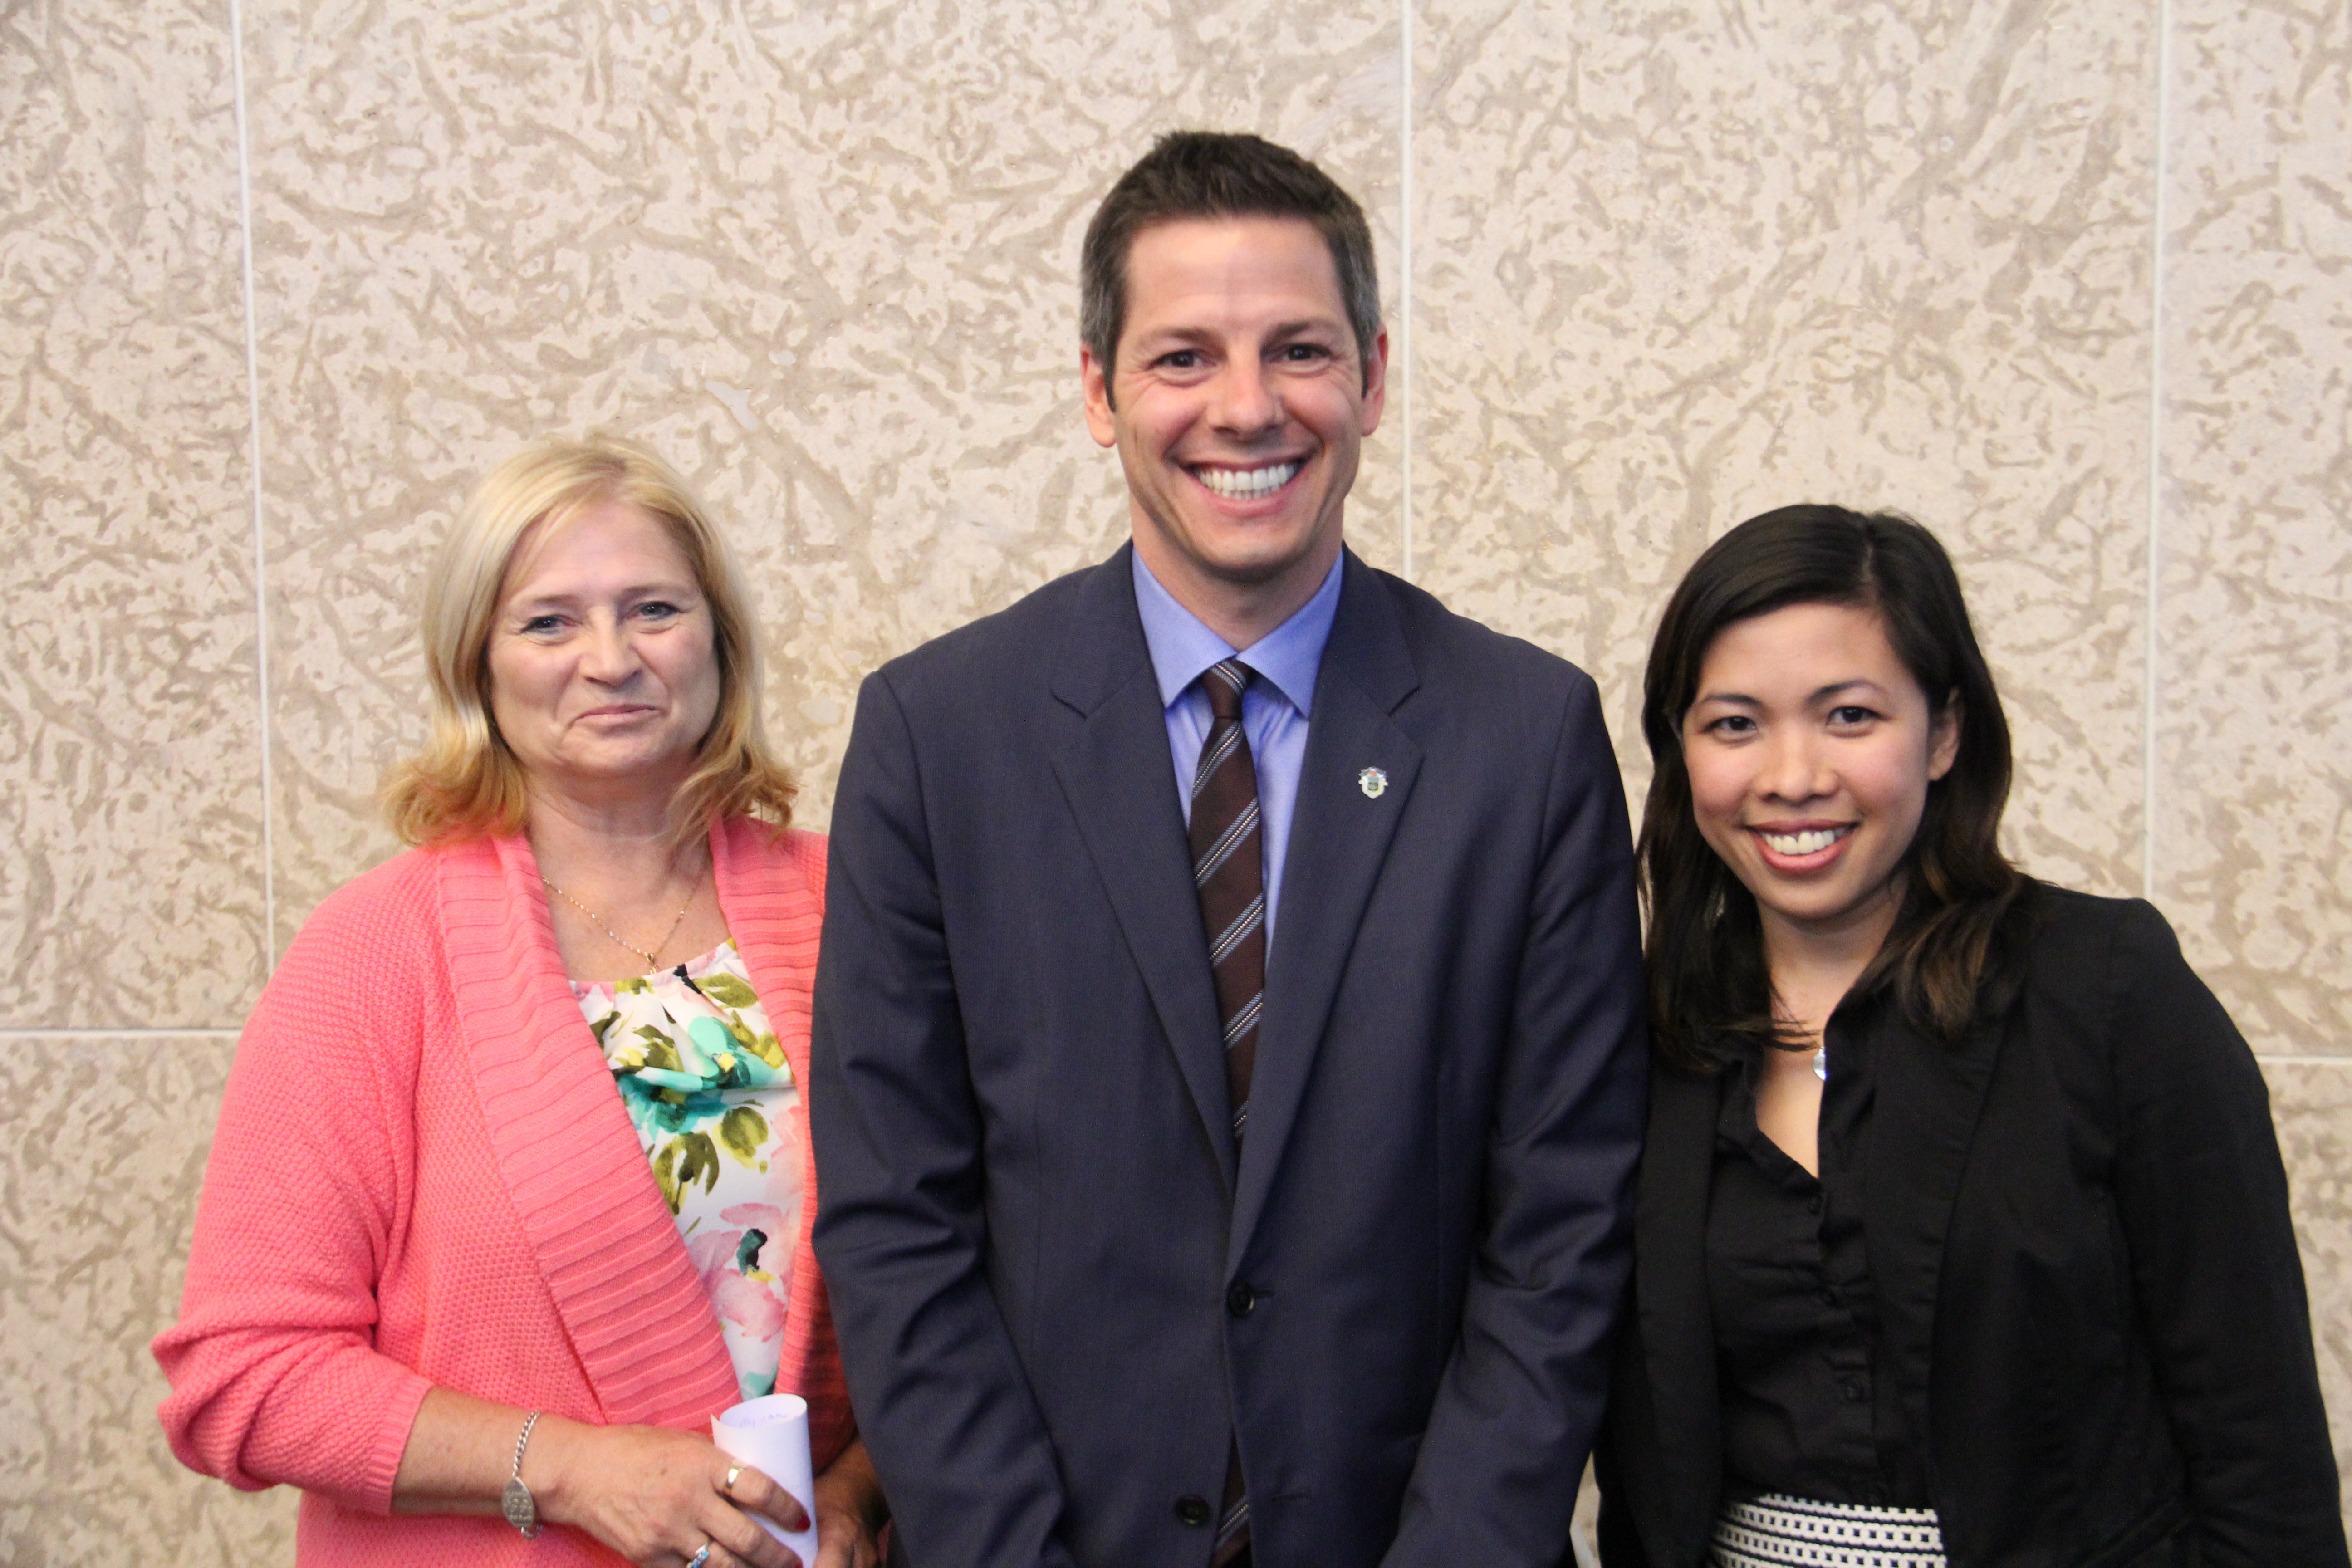 Val and Gladys with Mayor Bowman